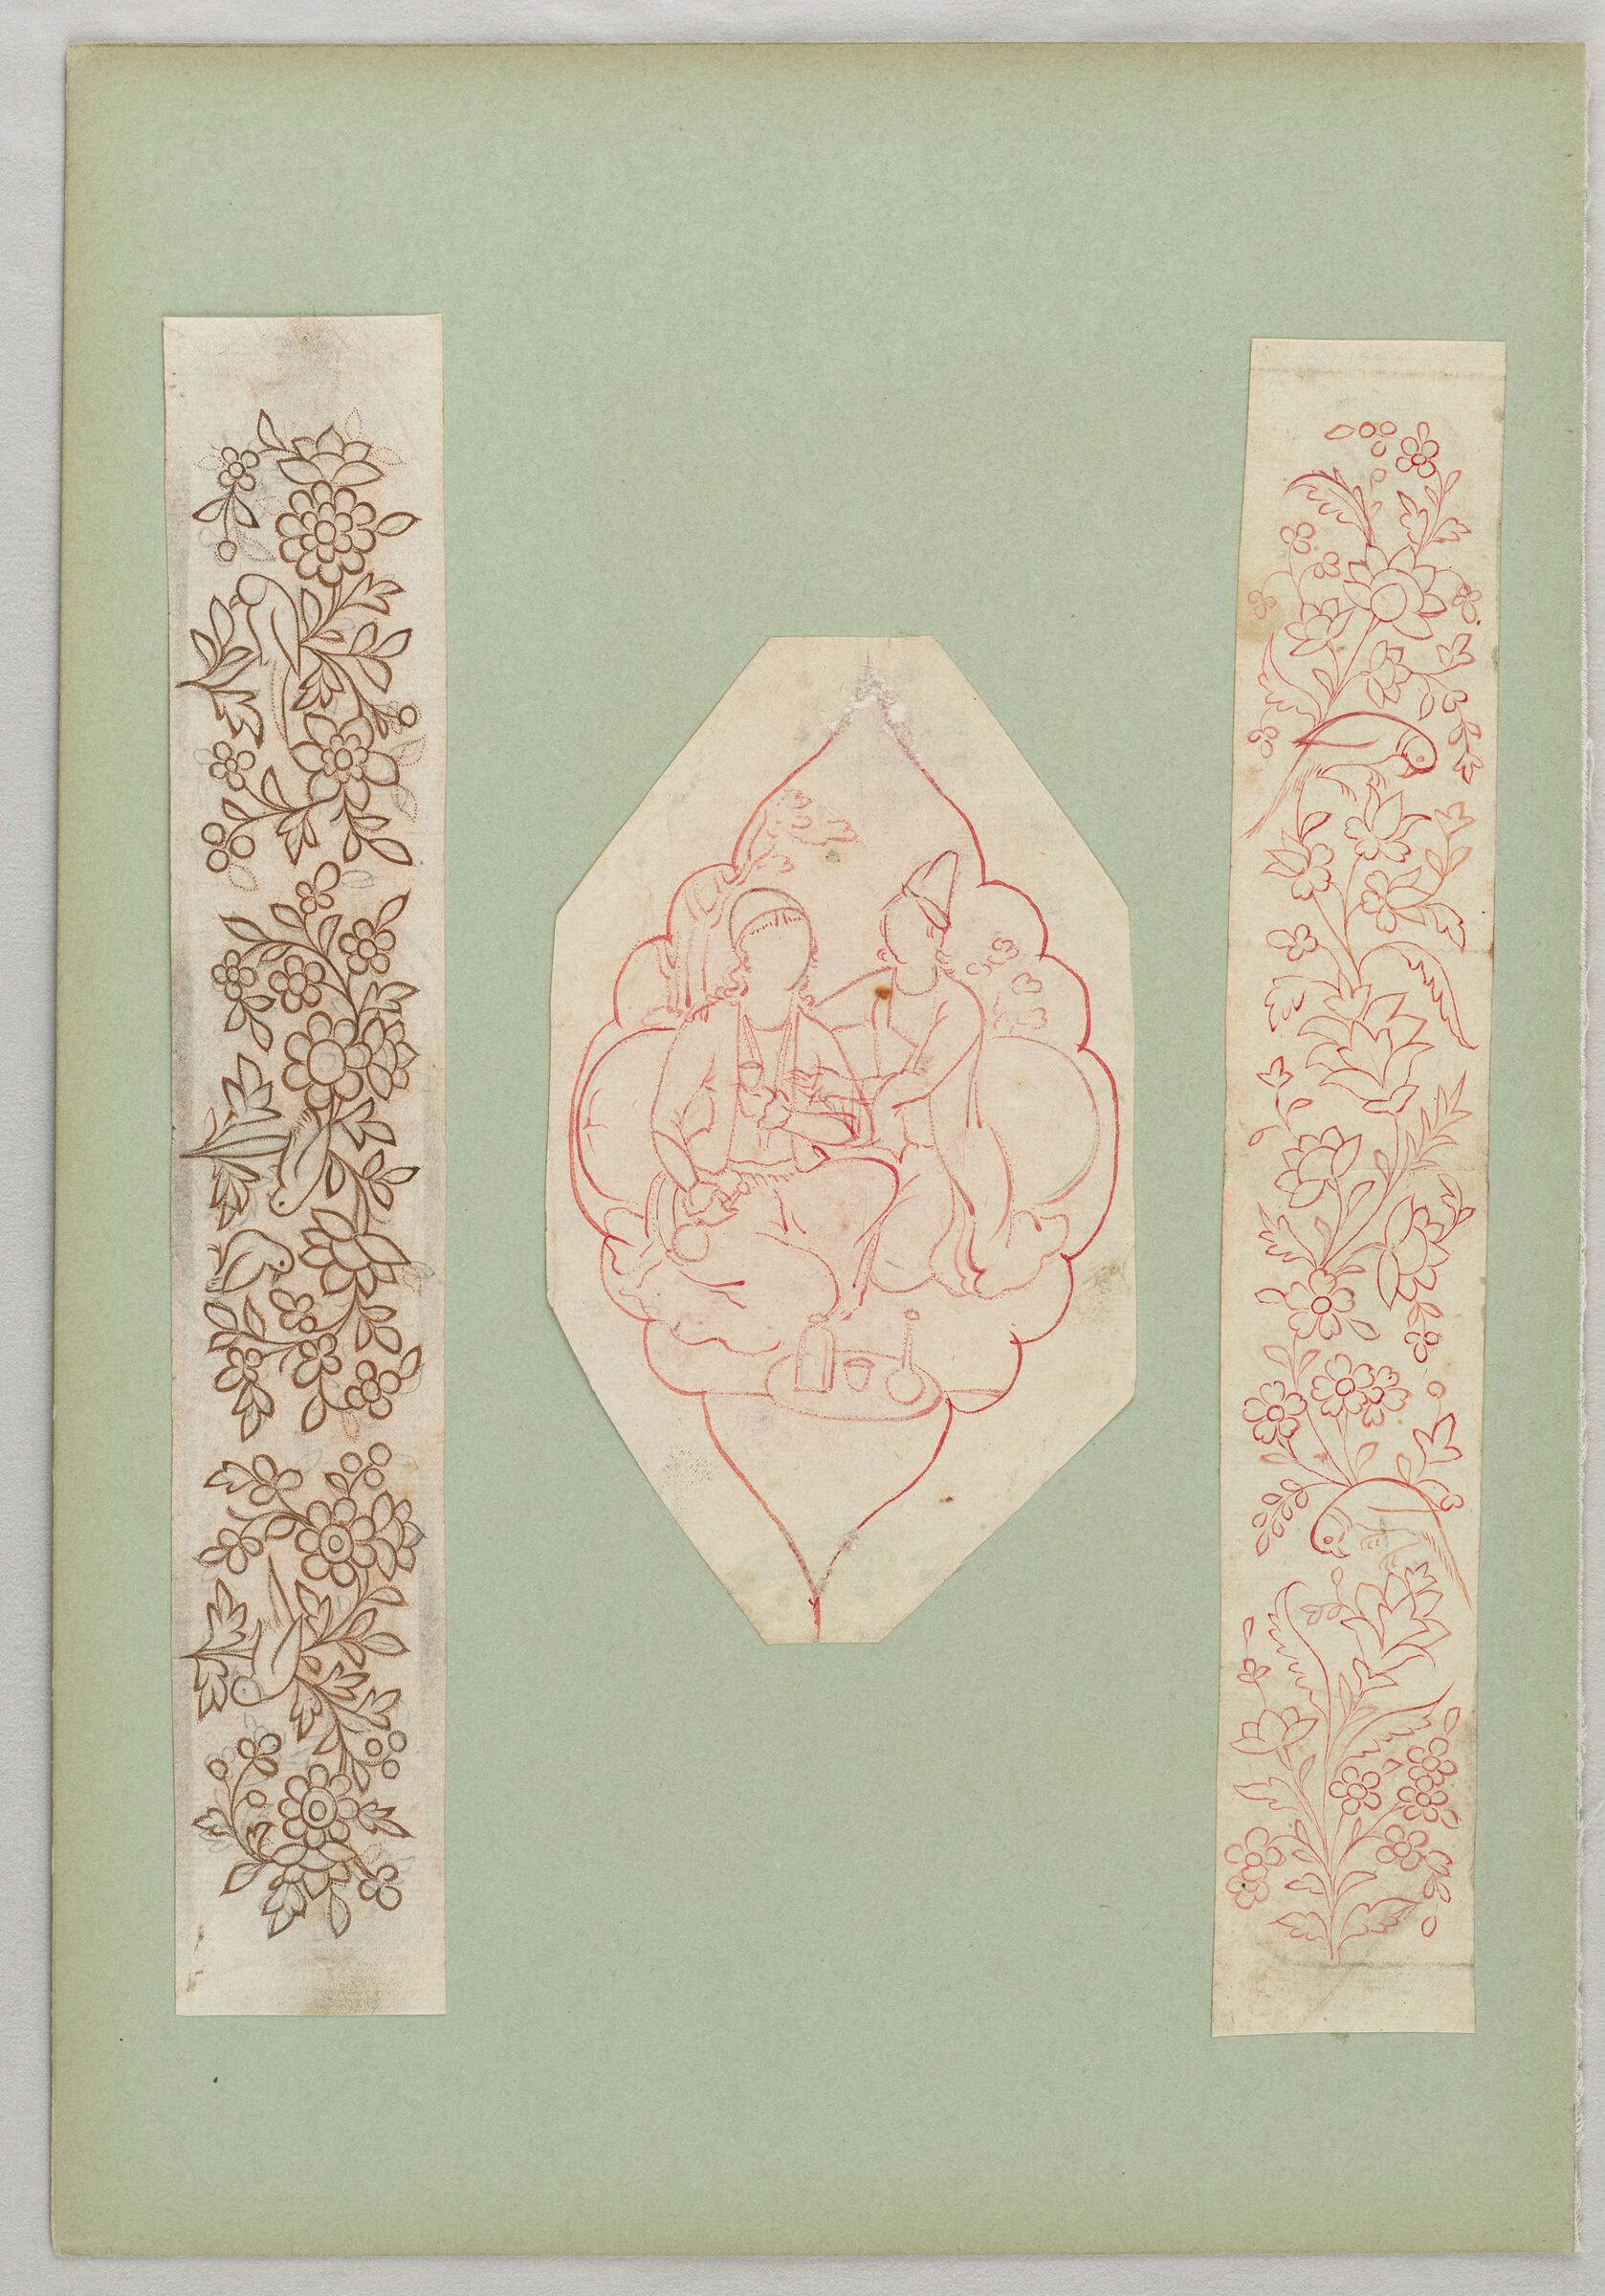 Folio 23 From An Album Of Drawings And Paintings: Three Sheets: Bird And Flower Designs For A Penbox; Polylobed Cartouche Enclosing Couple (Recto); Blank Page (Verso)